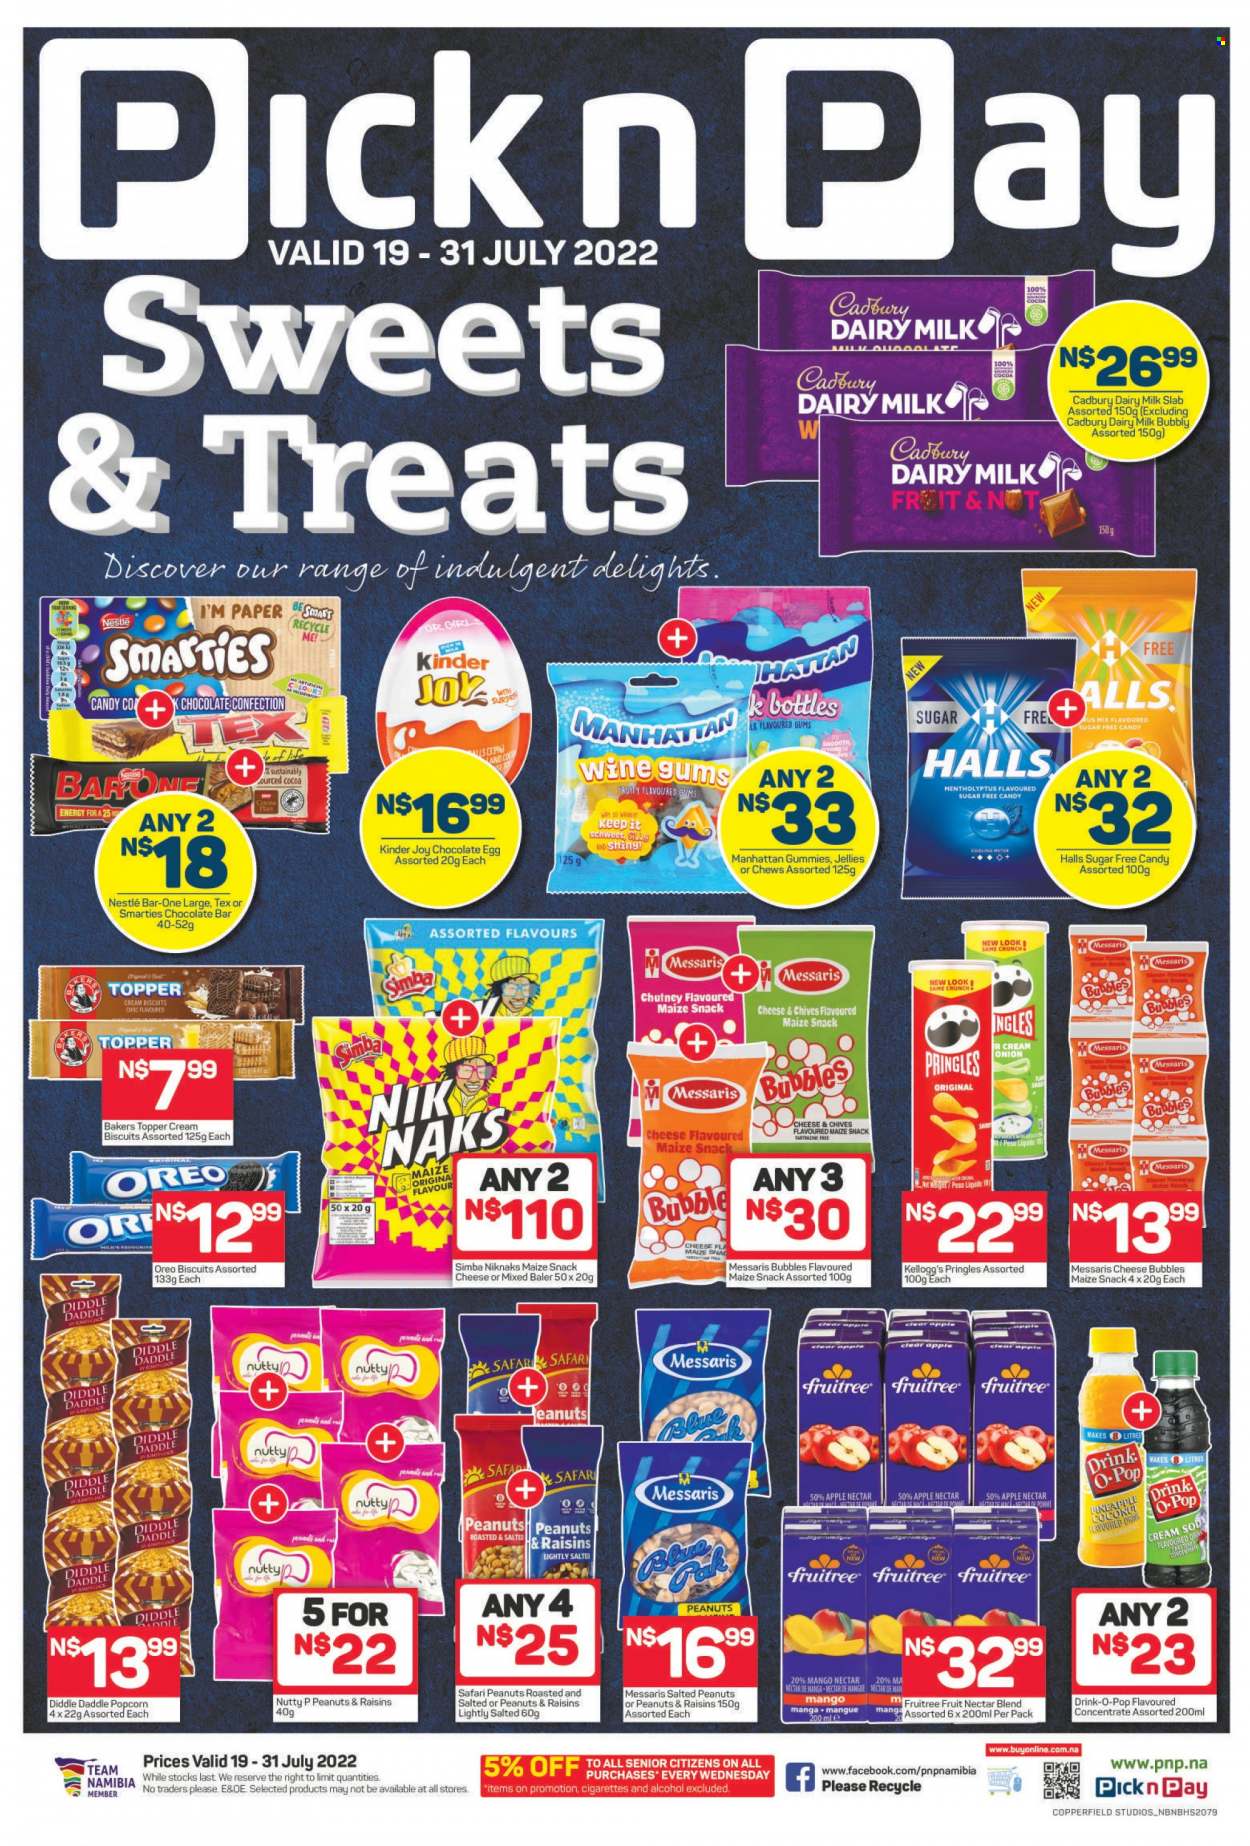 Pick n Pay catalogue  - 19/07/2022 - 31/07/2022 - Sales products - onion, chives, pineapple, coconut, Oreo, eggs, Nestlé, Halls, snack, Kinder Joy, Smarties, chewing gum, Kellogg's, biscuit, Cadbury, Dairy Milk, chocolate bar, Pringles, maize snack, Simba, popcorn, Nik Naks, peanuts, dried fruit, fruit nectar, alcohol, Bakers. Page 1.